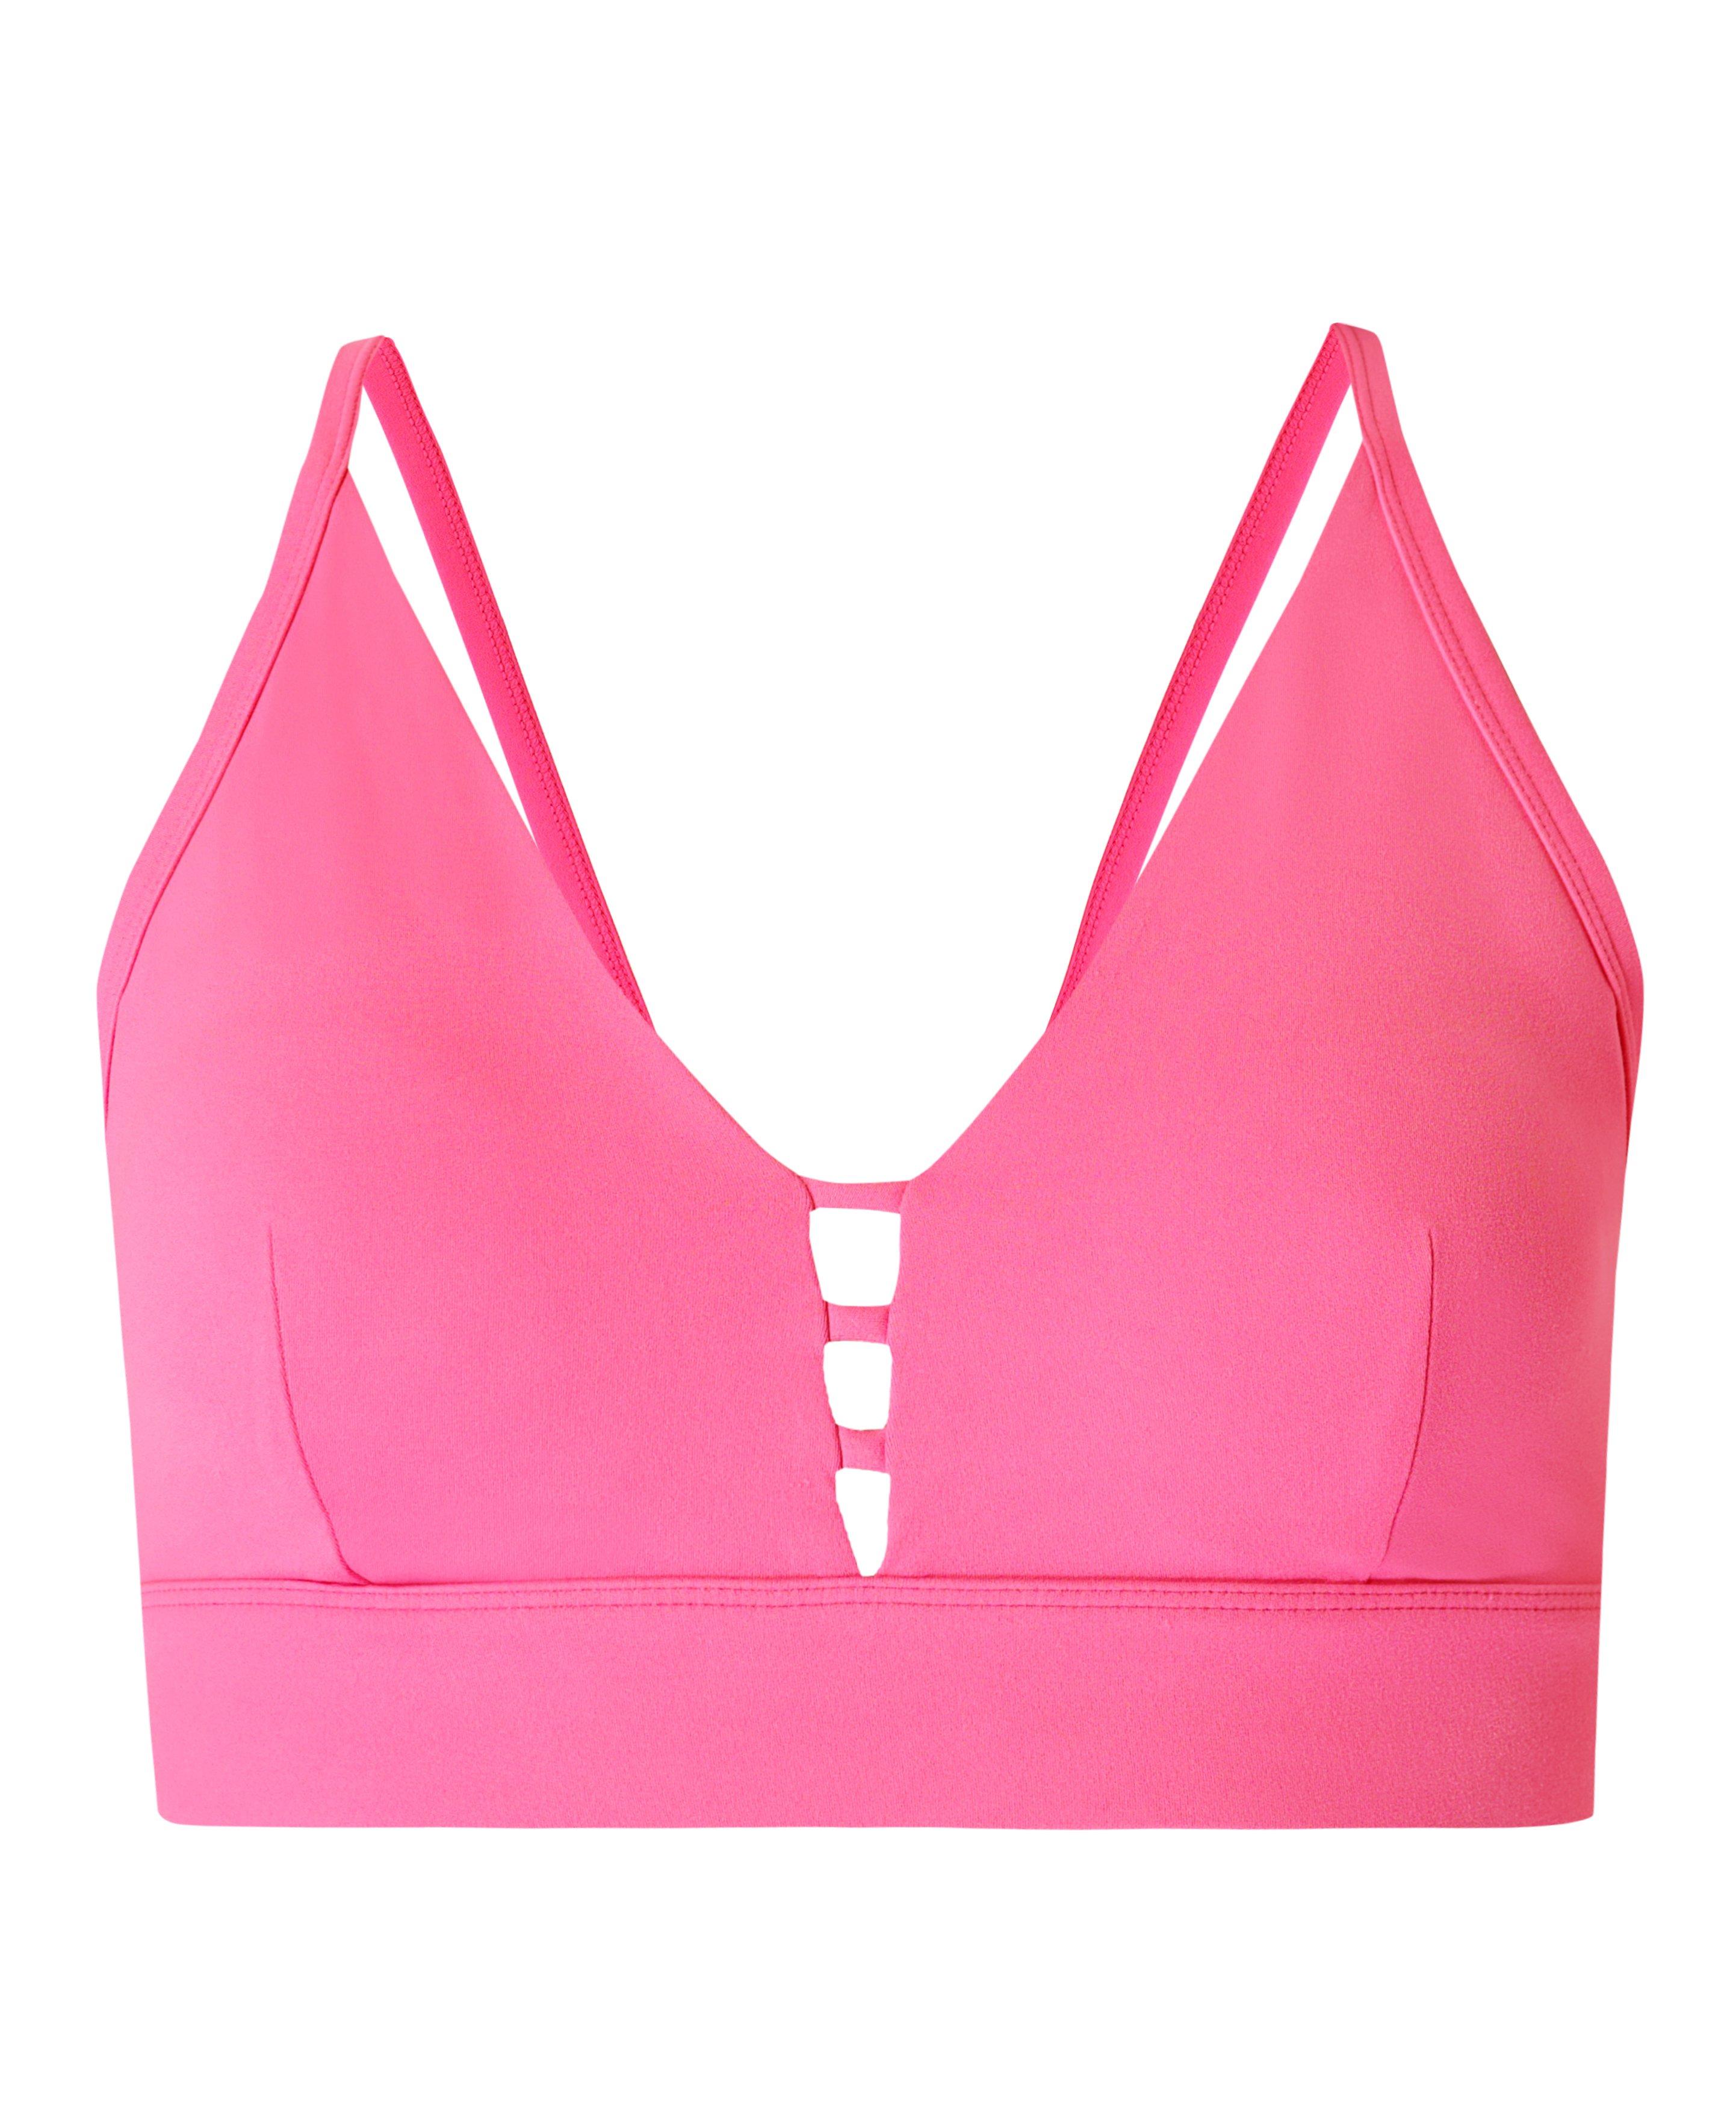 Women's Everyday Soft Light Support Strappy Sports Bra - All In Motion™ Pink  XL 1 ct